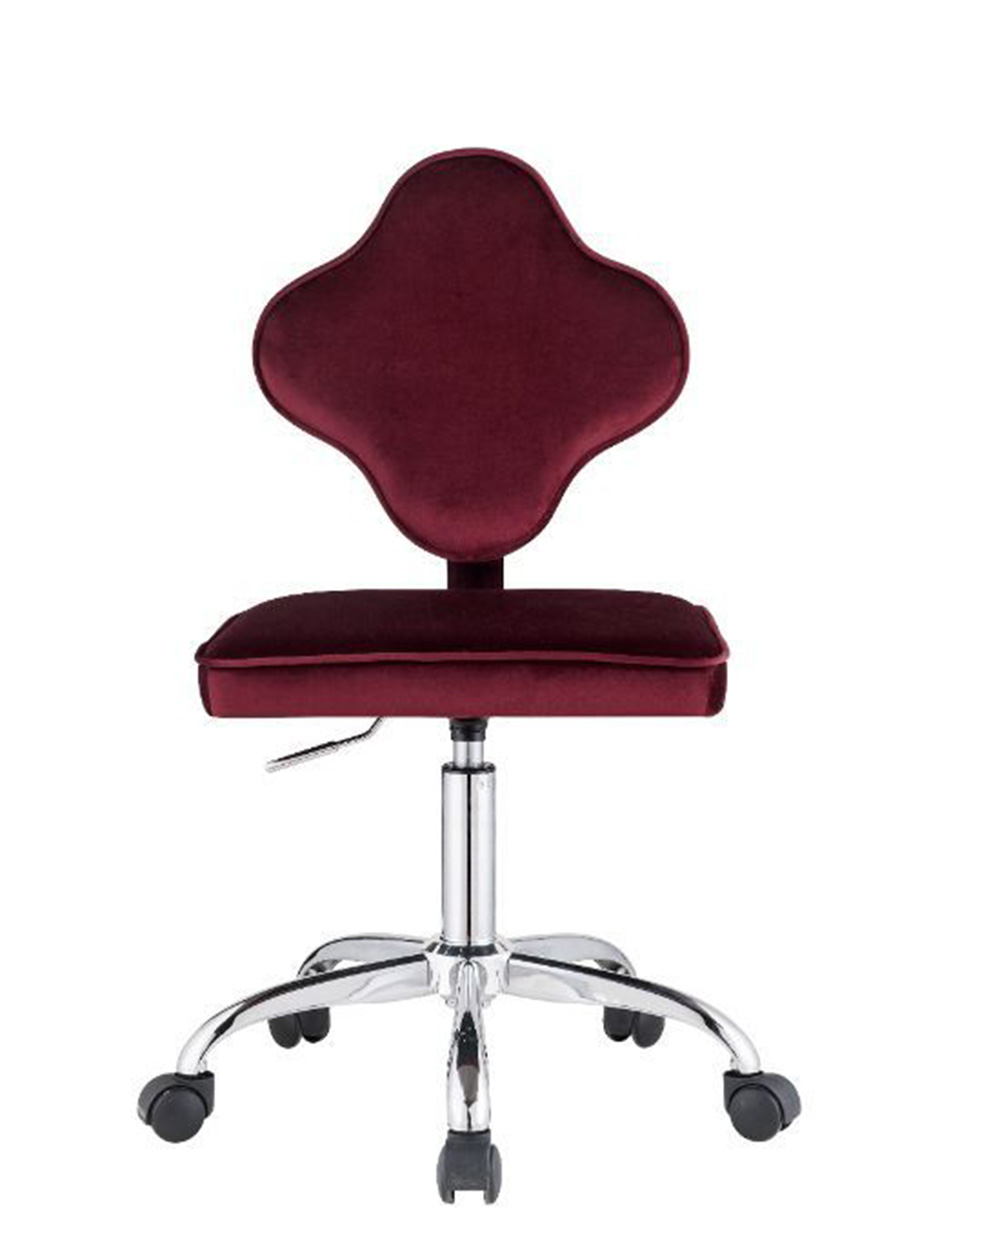 ACME Clover Modern Leisure Velvet Swivel Chair Height Adjustable with Backrest and Casters for Living Room, Bedroom, Dining Room, Office - Red